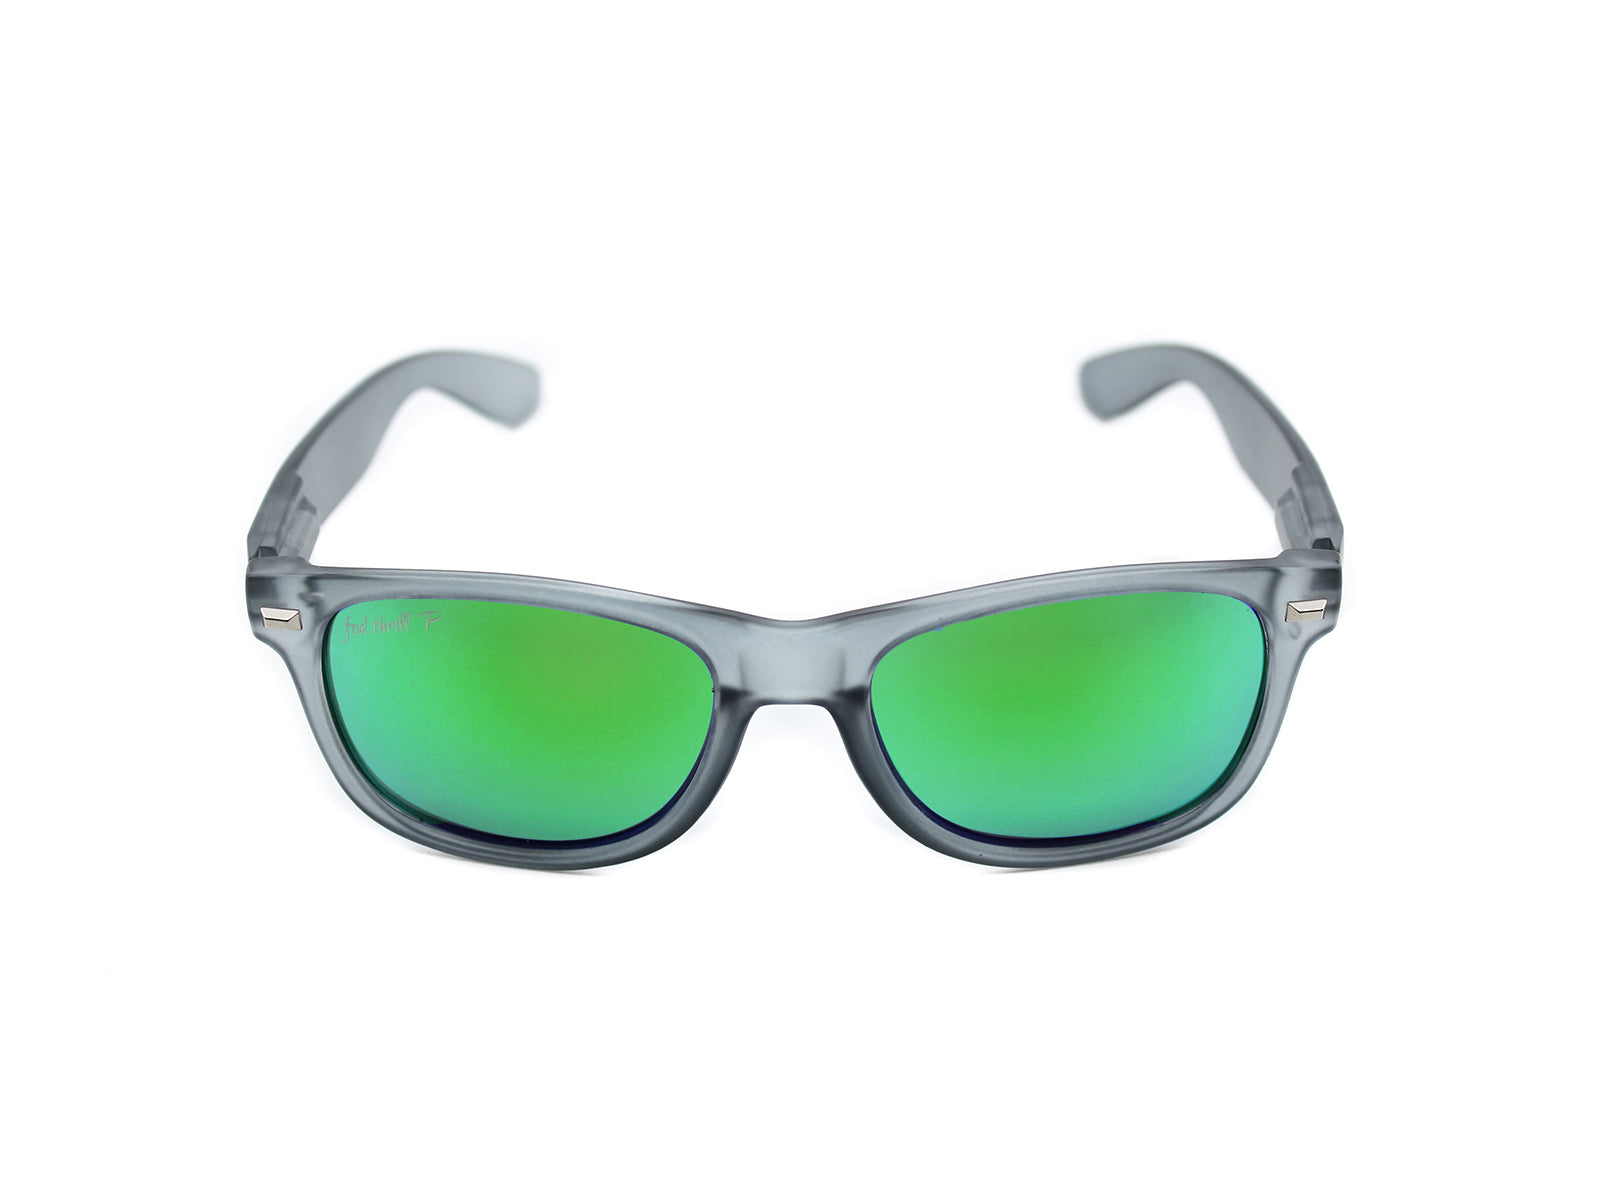 Fultons - Mosses: Frosted Gray / Mirrored Green Polarized